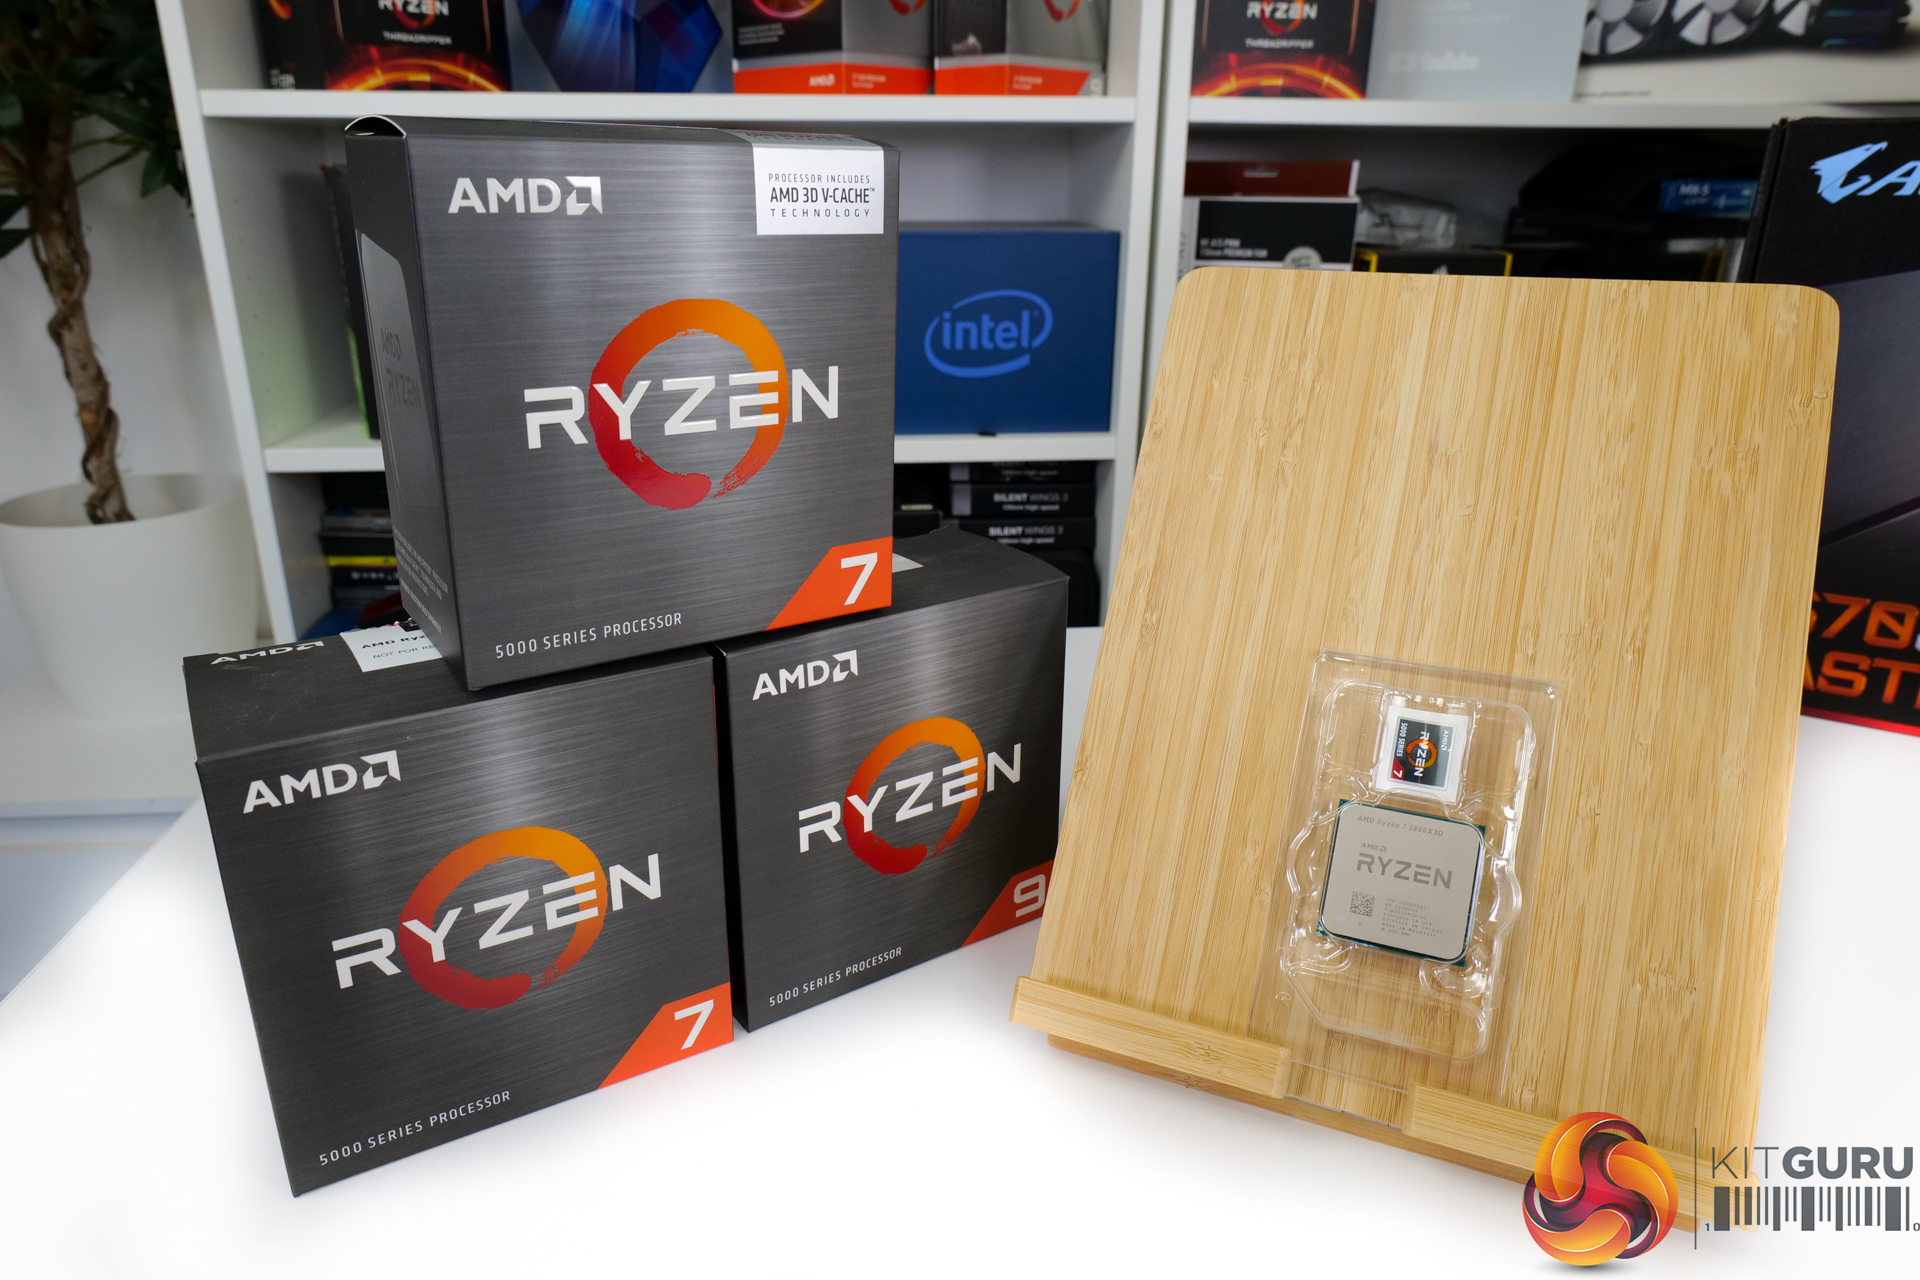 AMD Ryzen 7 5800X3D, The World's First 3D V-Cache & Fastest Gaming CPU, Is  Now Available For $449 US